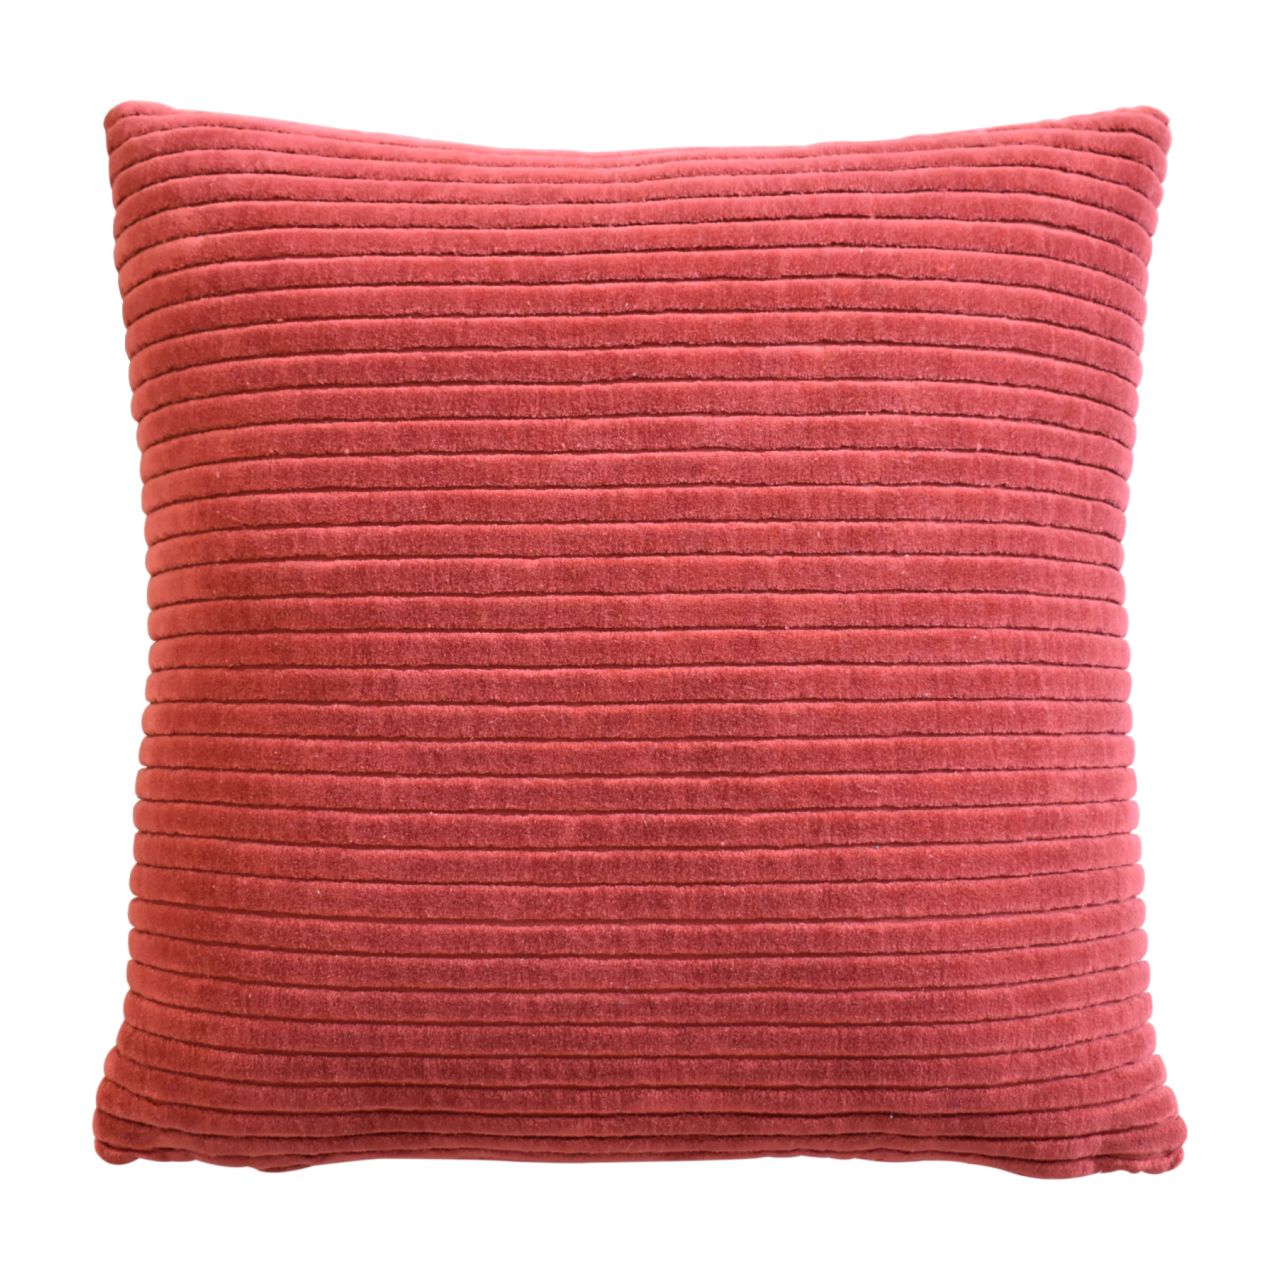 View Ribbed Red Cushion Set of 2 information